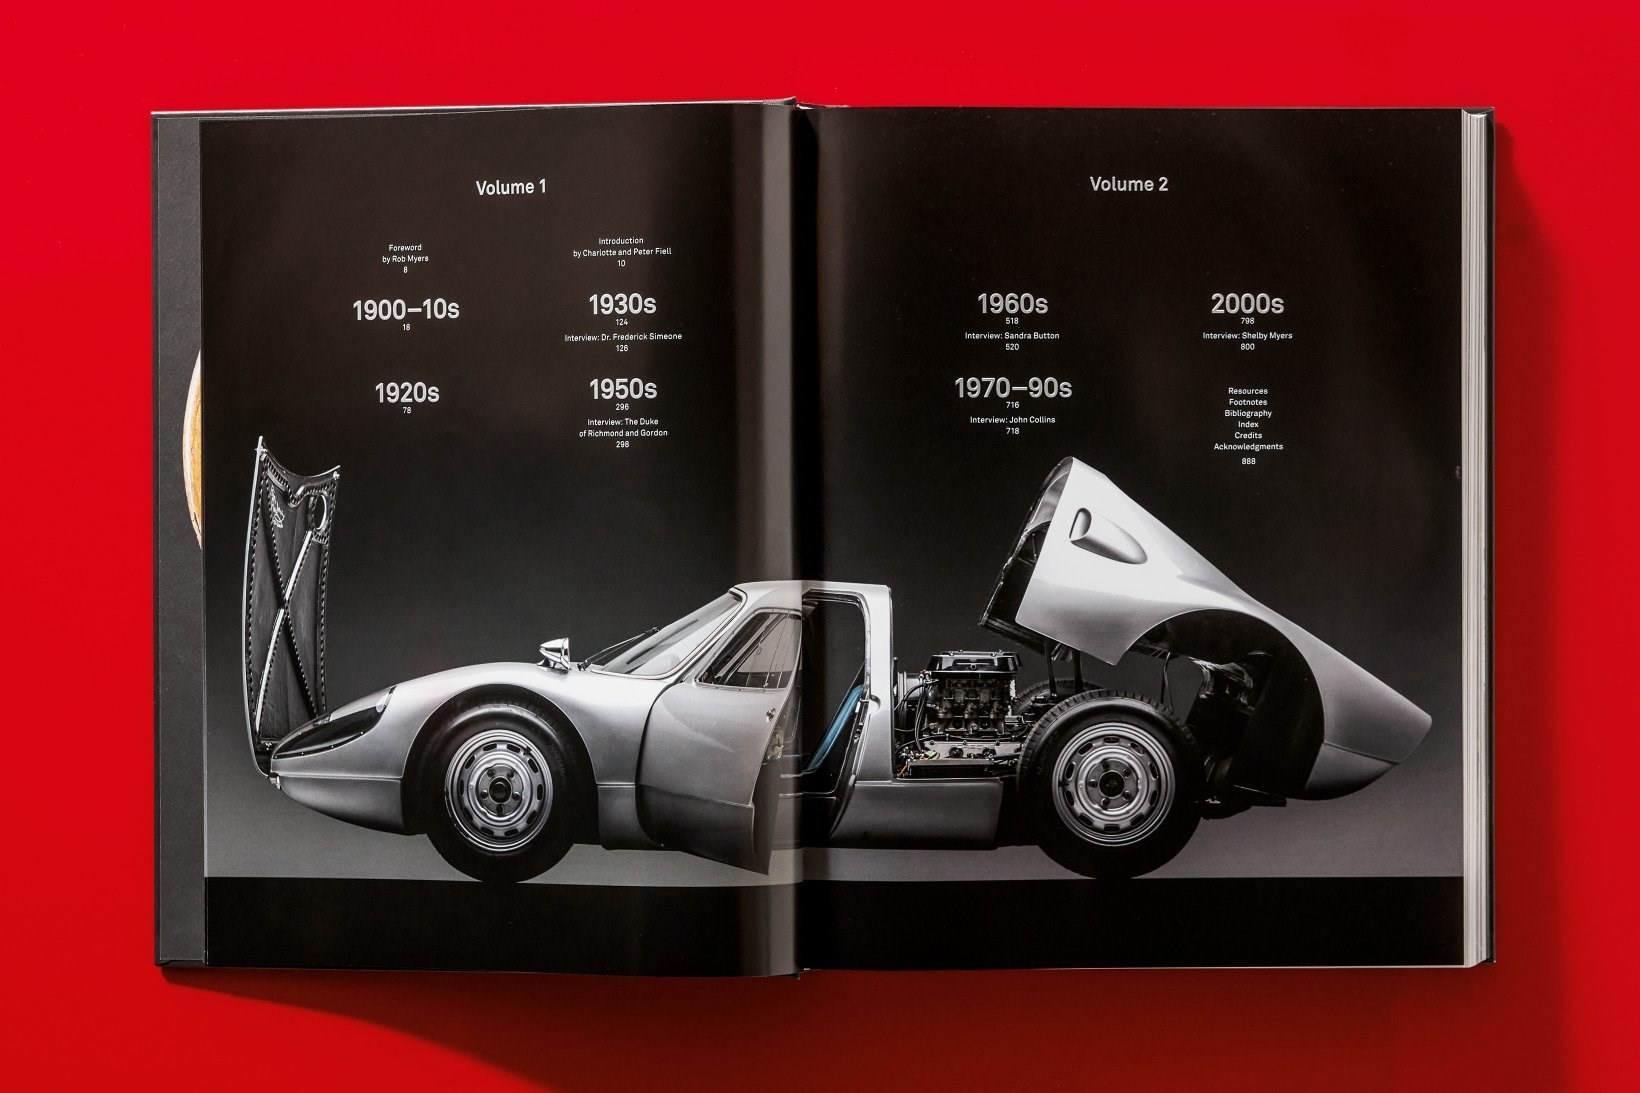 Introducing the £200 car book: we review the Ultimate Collector Cars opus | CAR Magazine